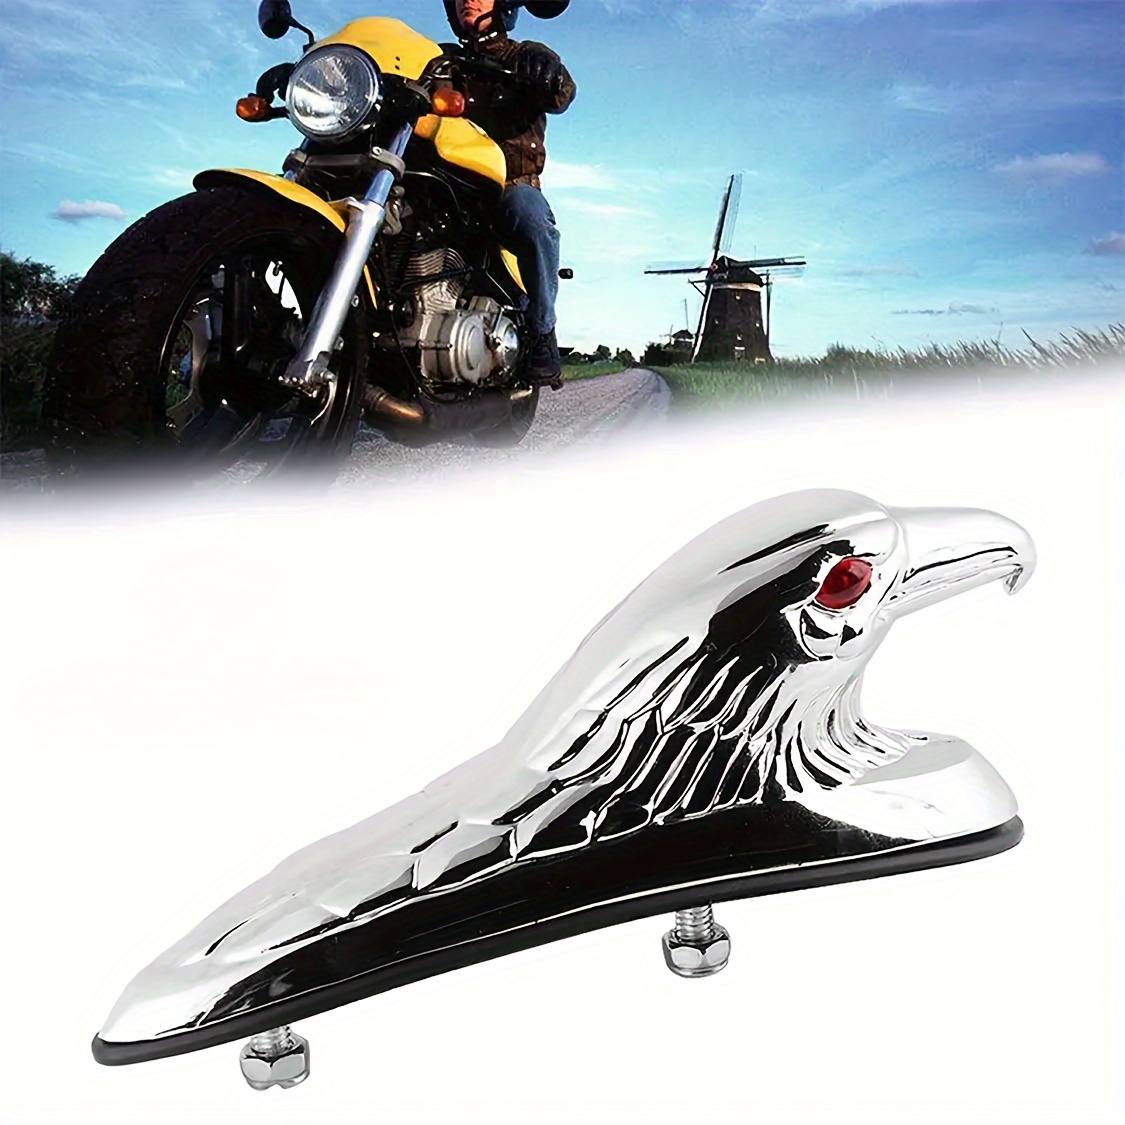 

1pc/set Motorcycle Front Mudguard Decorated With 3d Metal Eagle Head Statue Emblem And Car Sticker, A Universal Motorcycle Modification Accessory That Allows Your Motorcycle To Showcase Personality